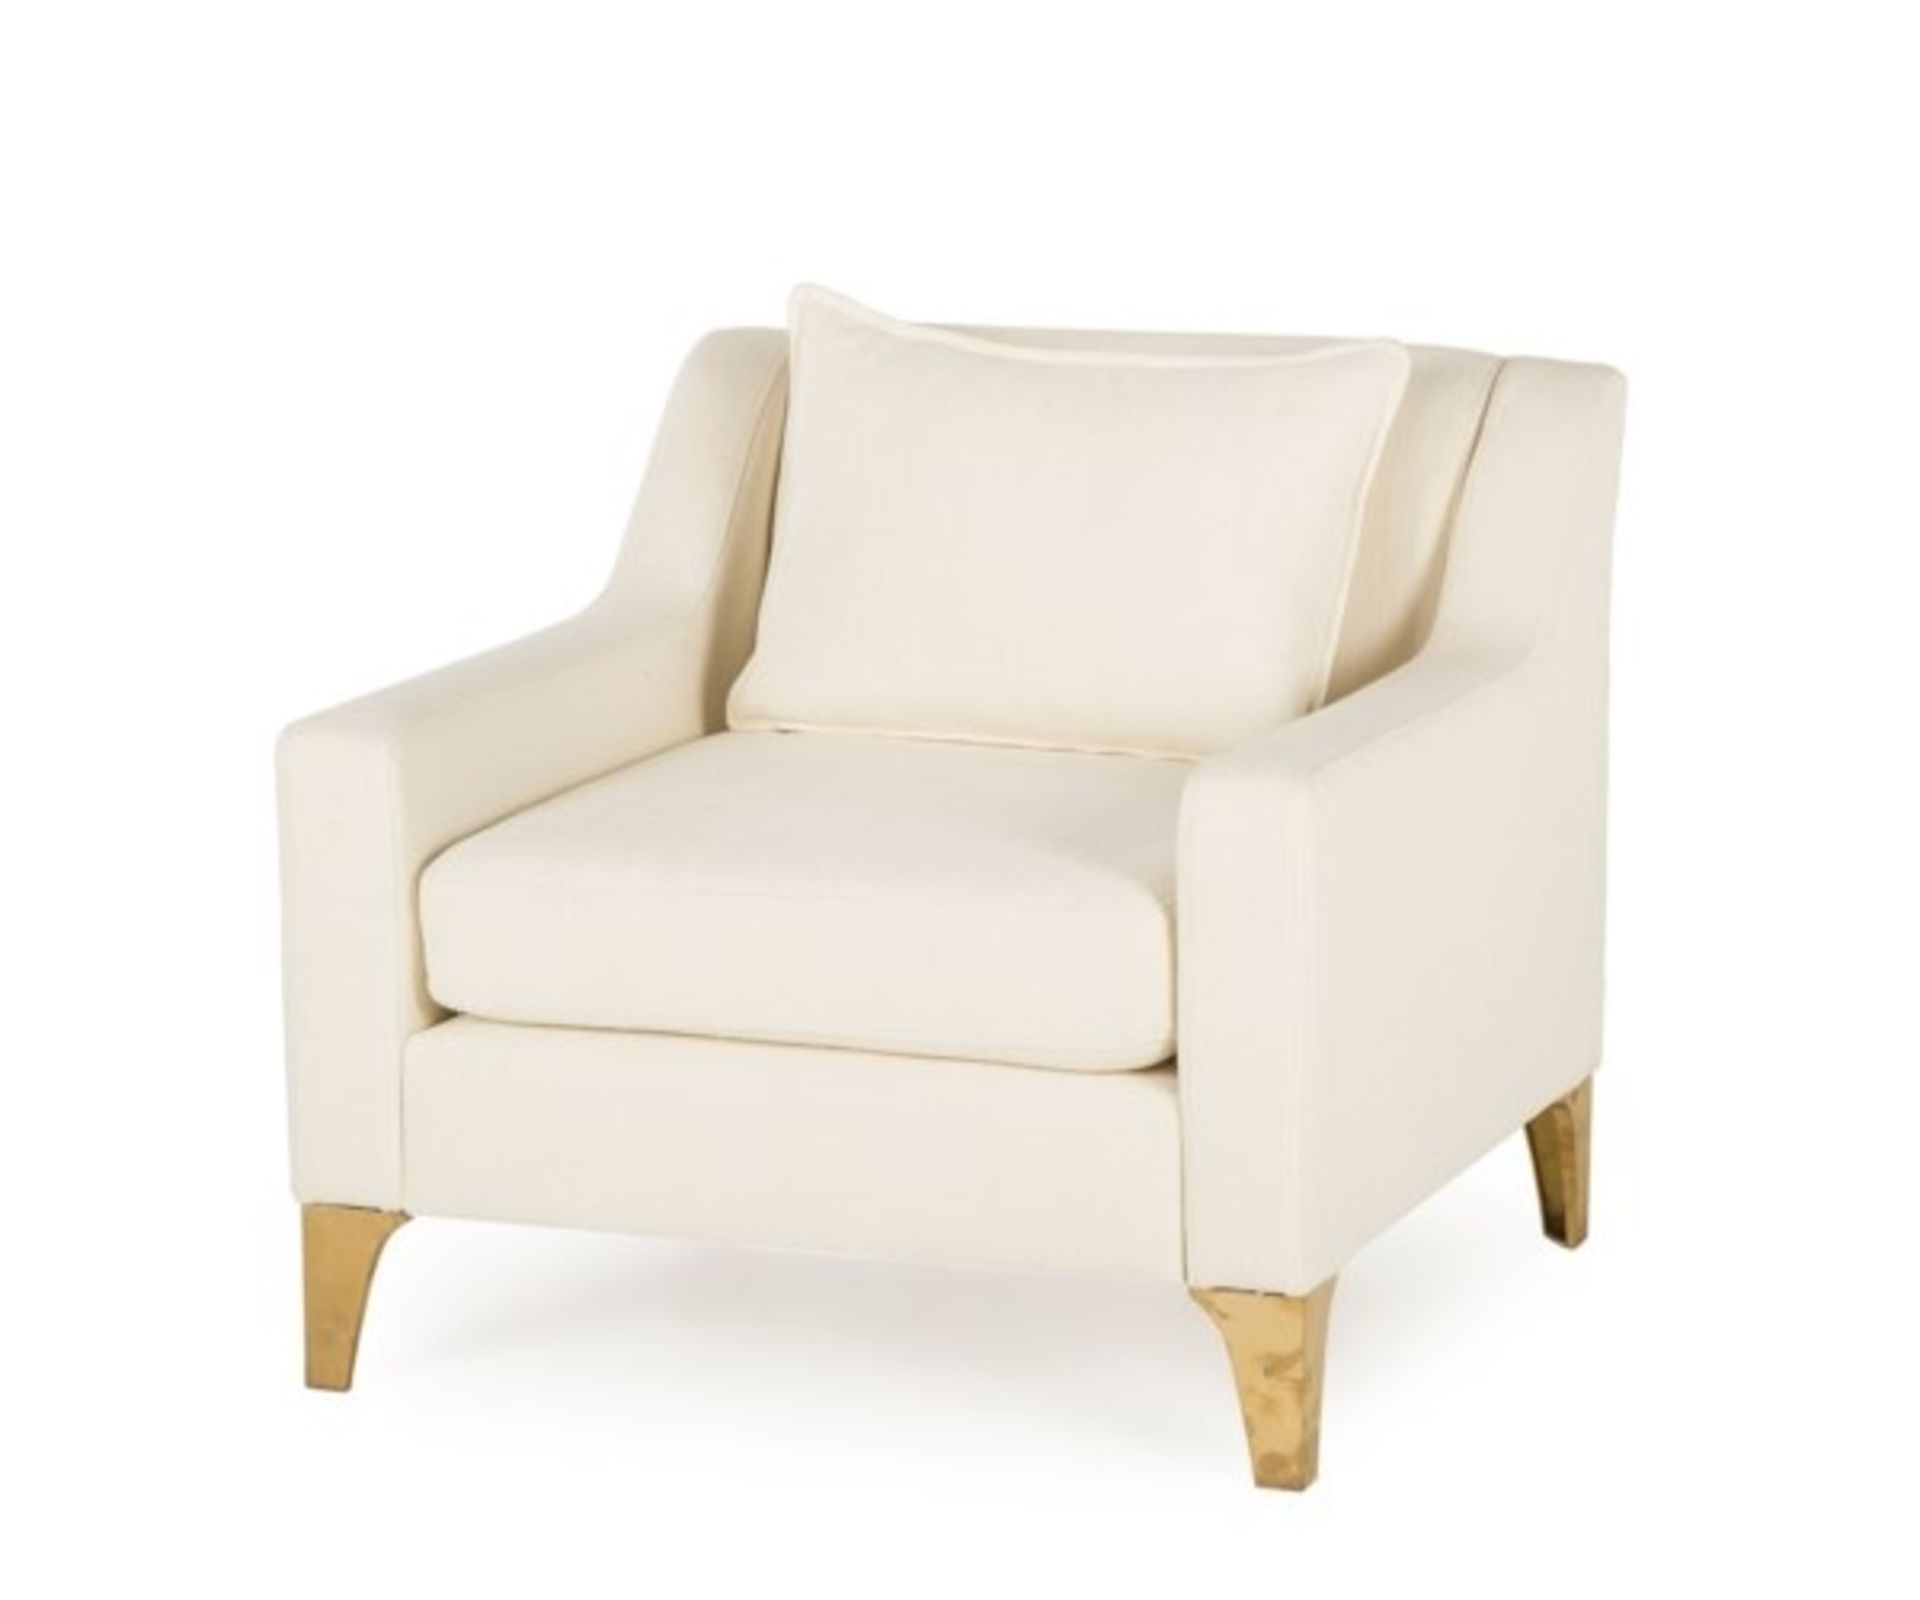 Lowrider Chair - Neva Ivory Style Meets Comfort In This Piece: A Classic Armchair Silhouette With